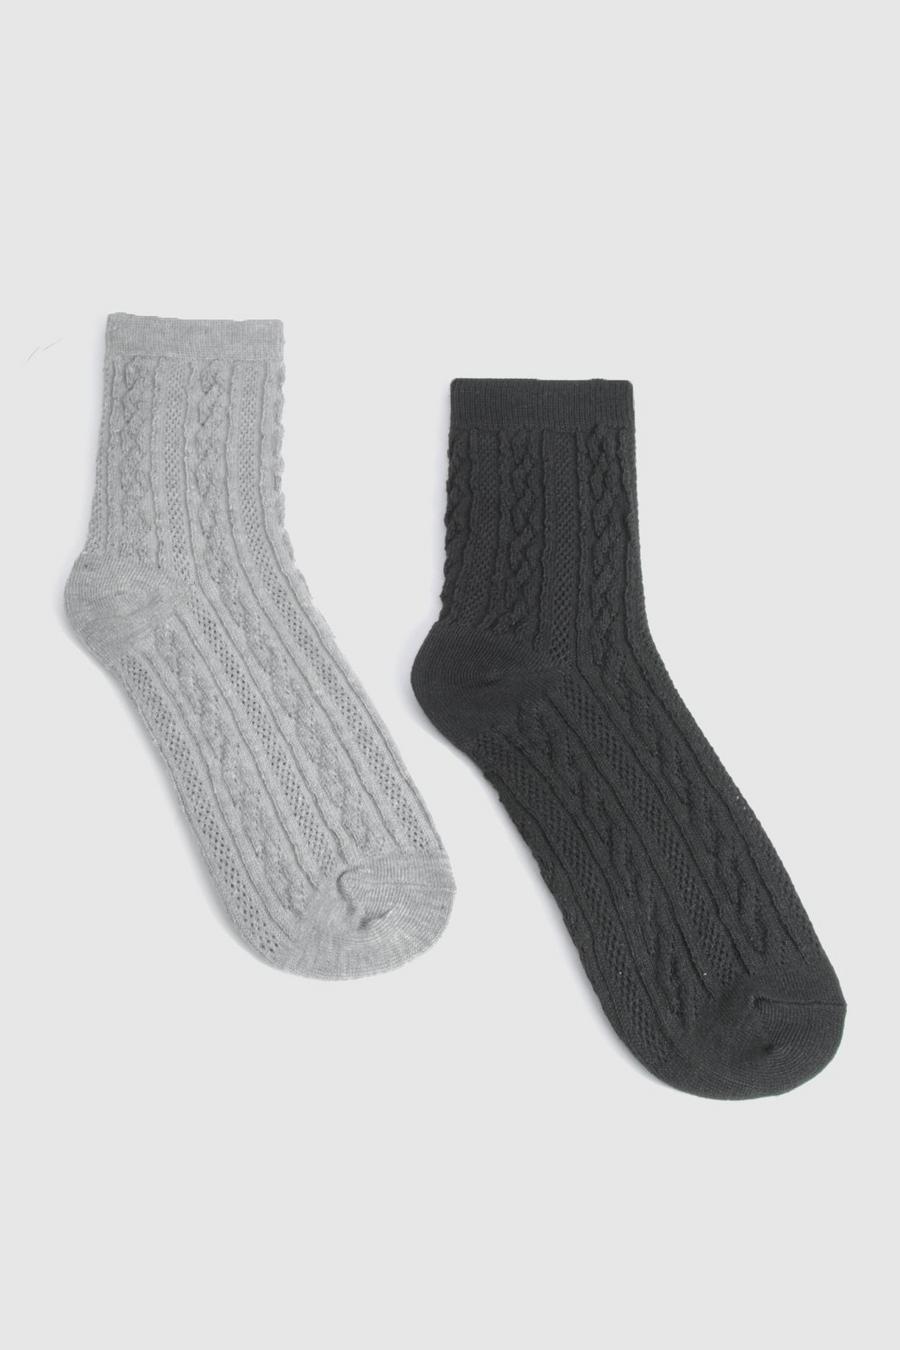 Multi 2 Pack Black And Grey Cable Lounge Socks 